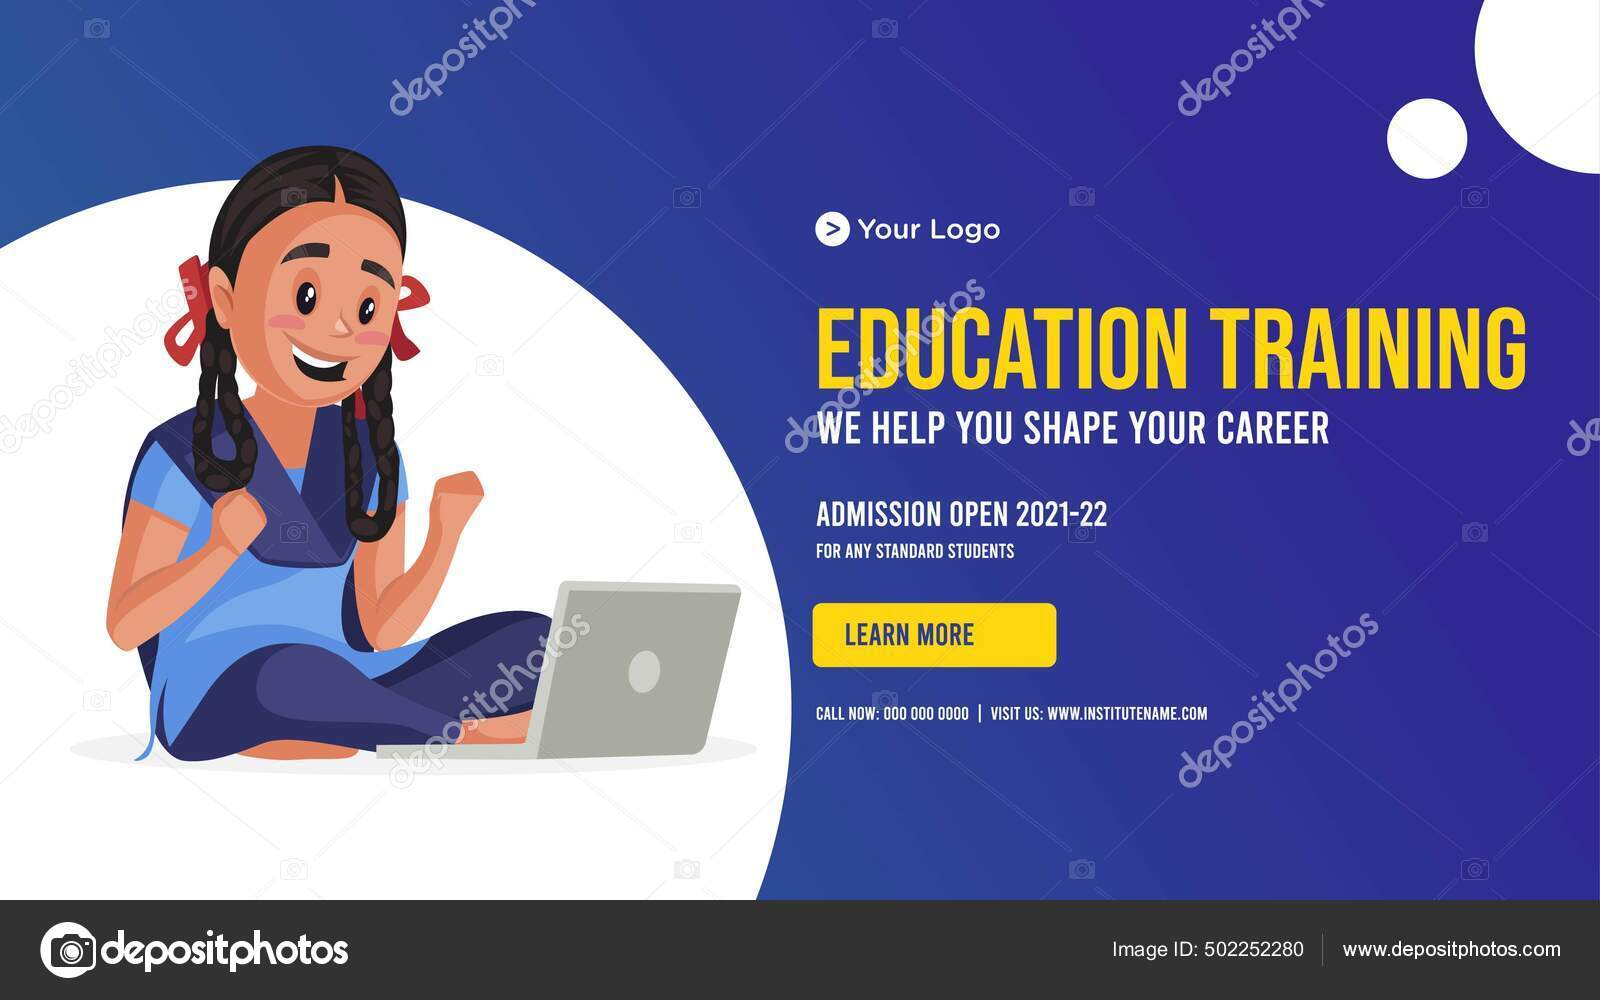 Admission open Vector Art Stock Images | Depositphotos